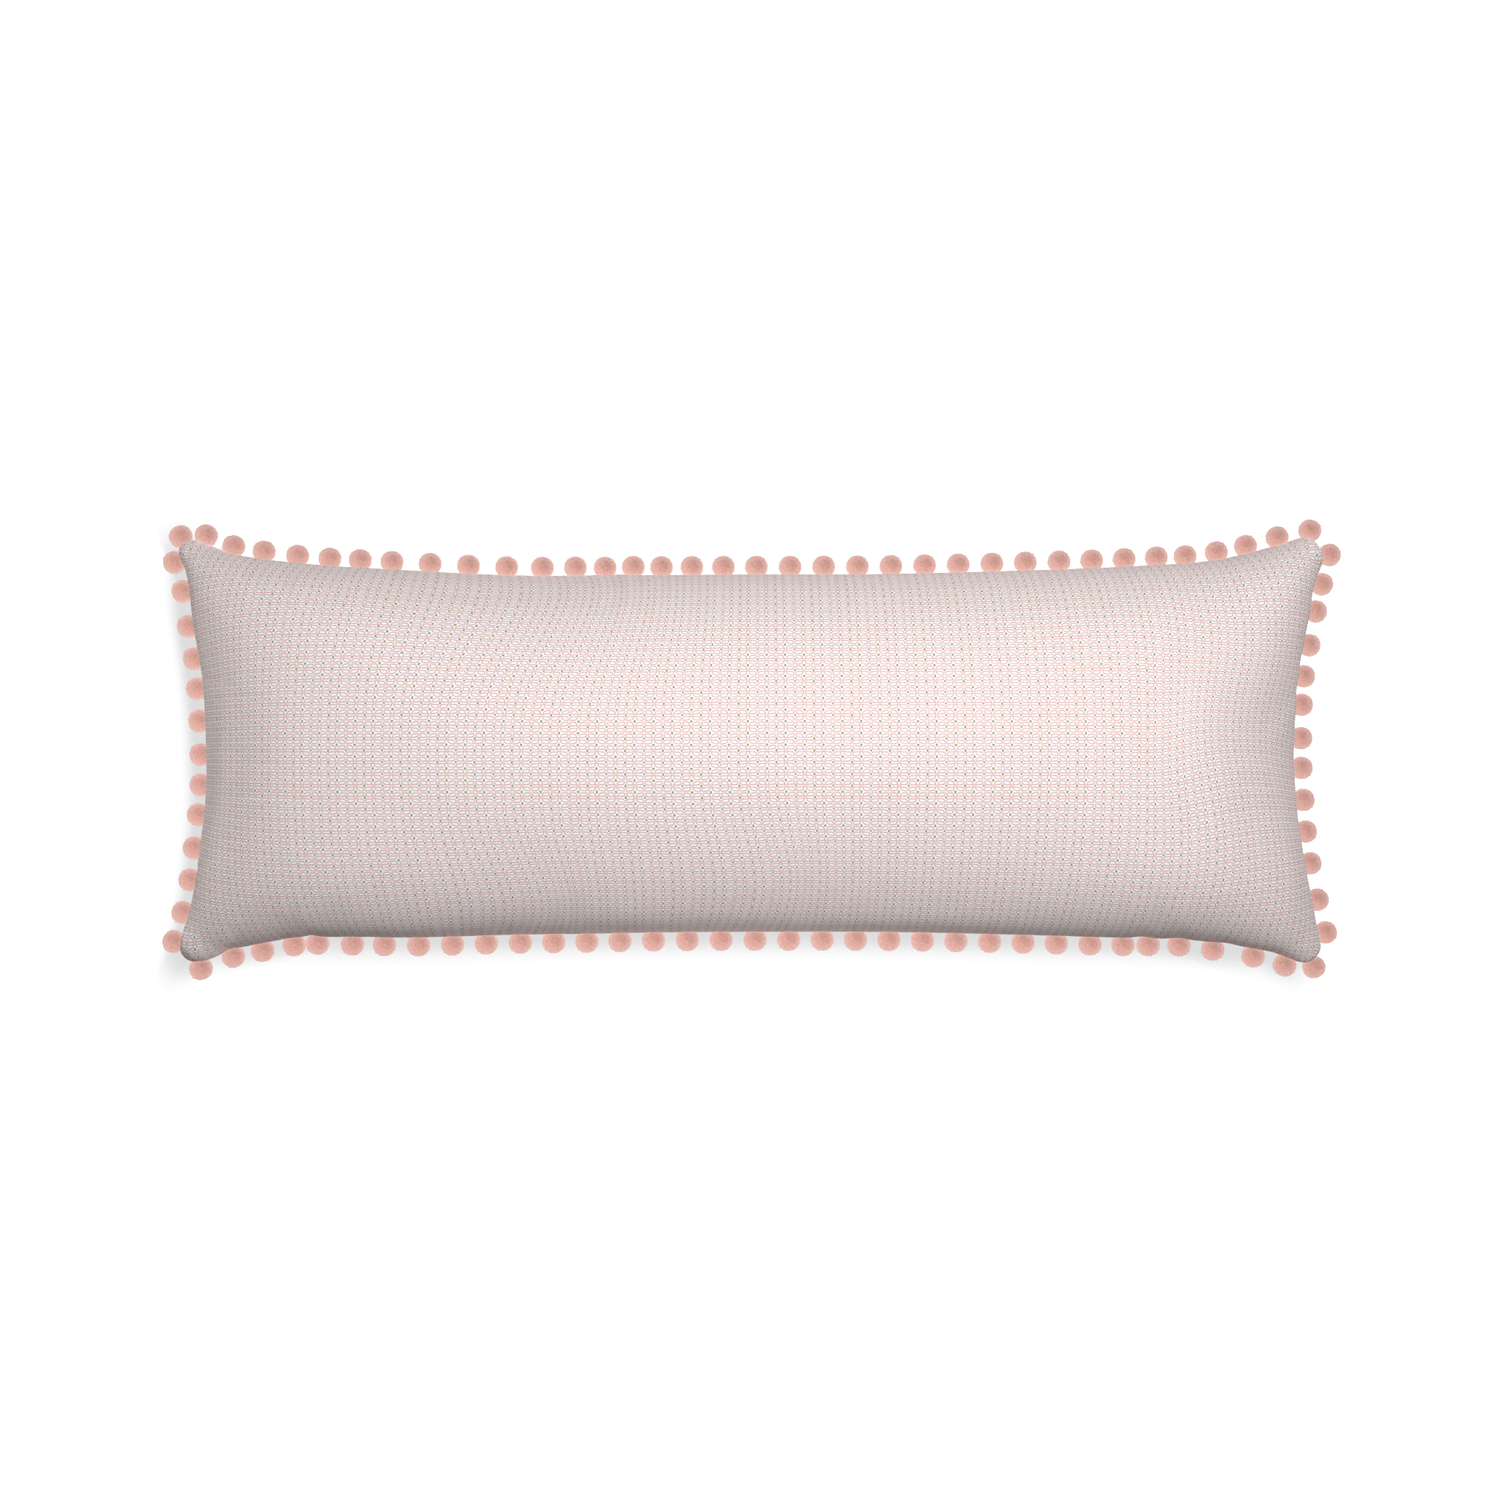 Xl-lumbar loomi pink custom pink geometricpillow with rose pom pom on white background